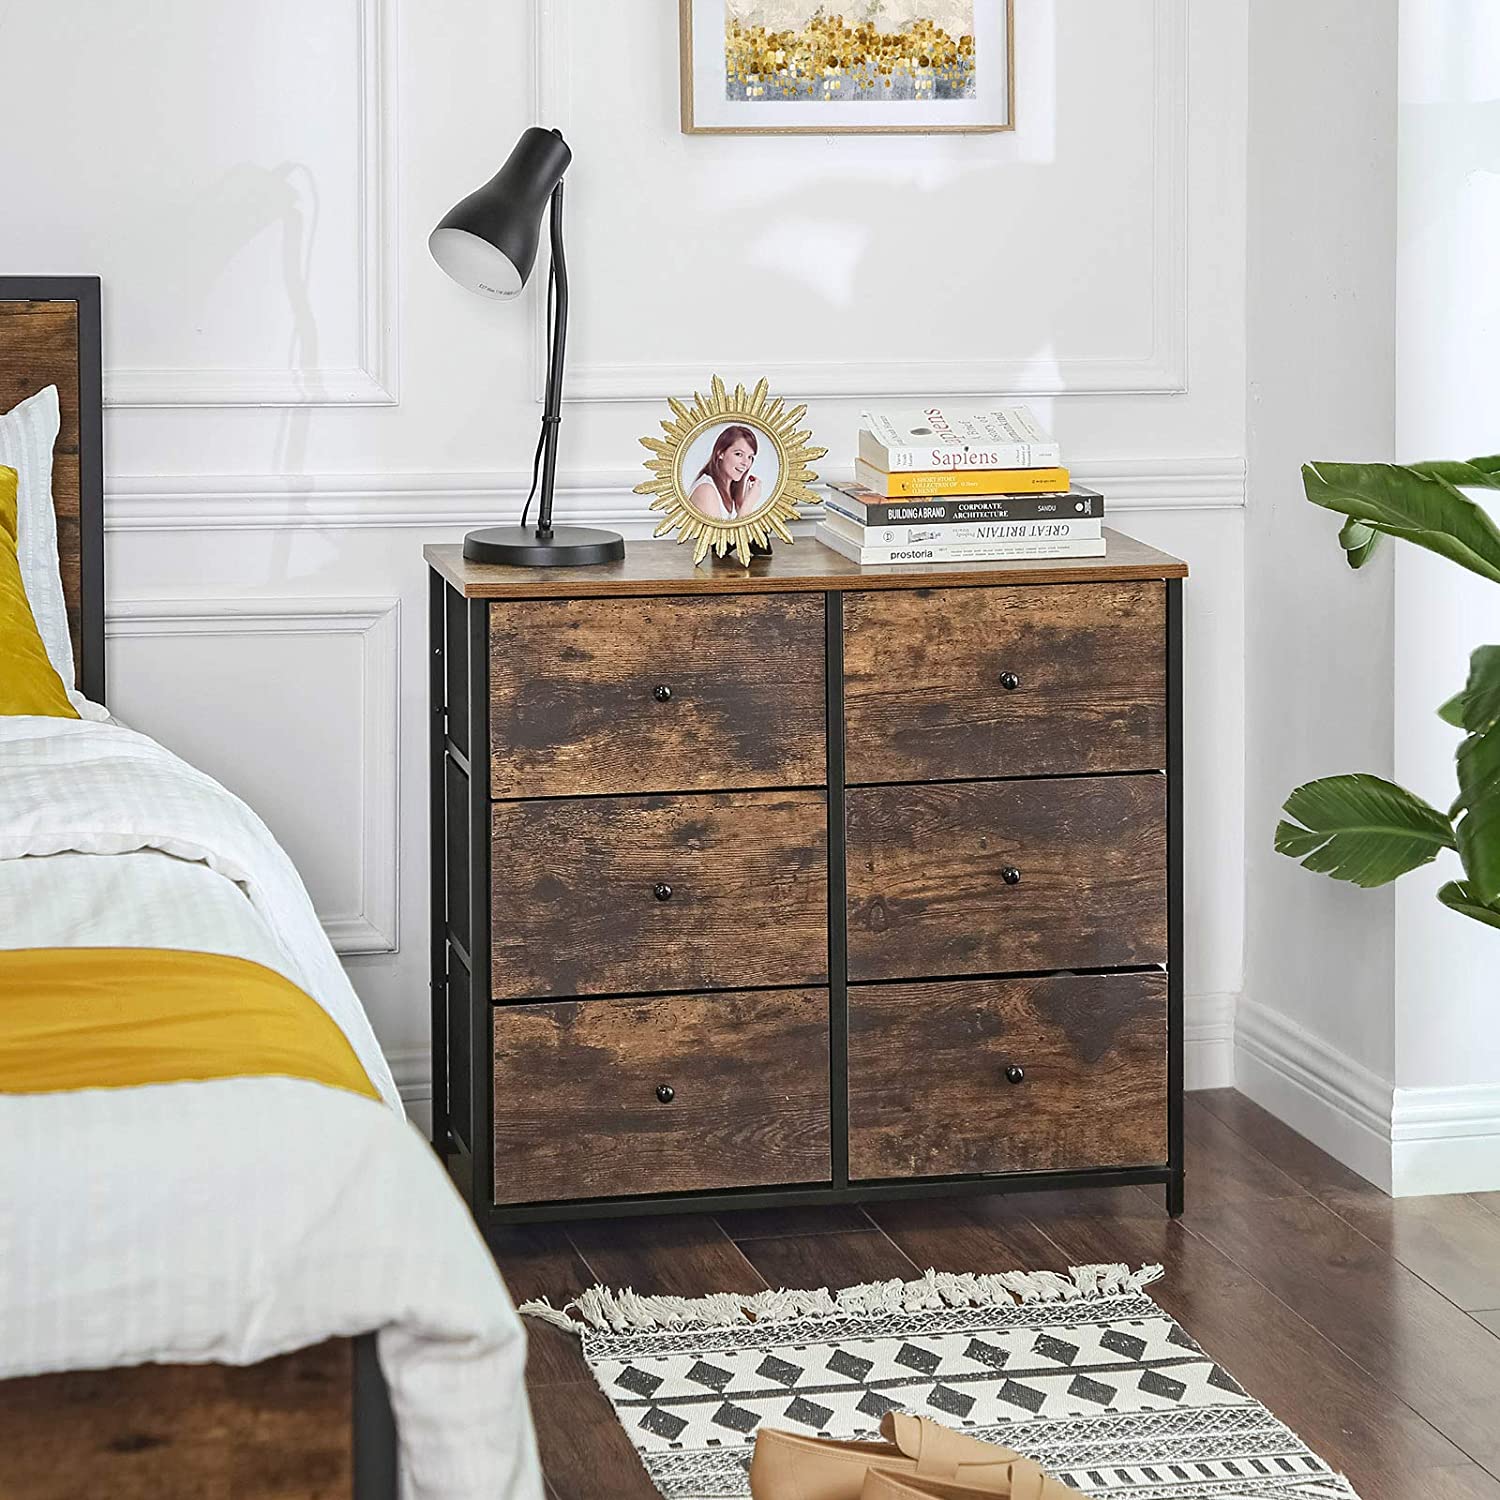 The Ultimate Guide to a Perfect Bedroom Cabinet